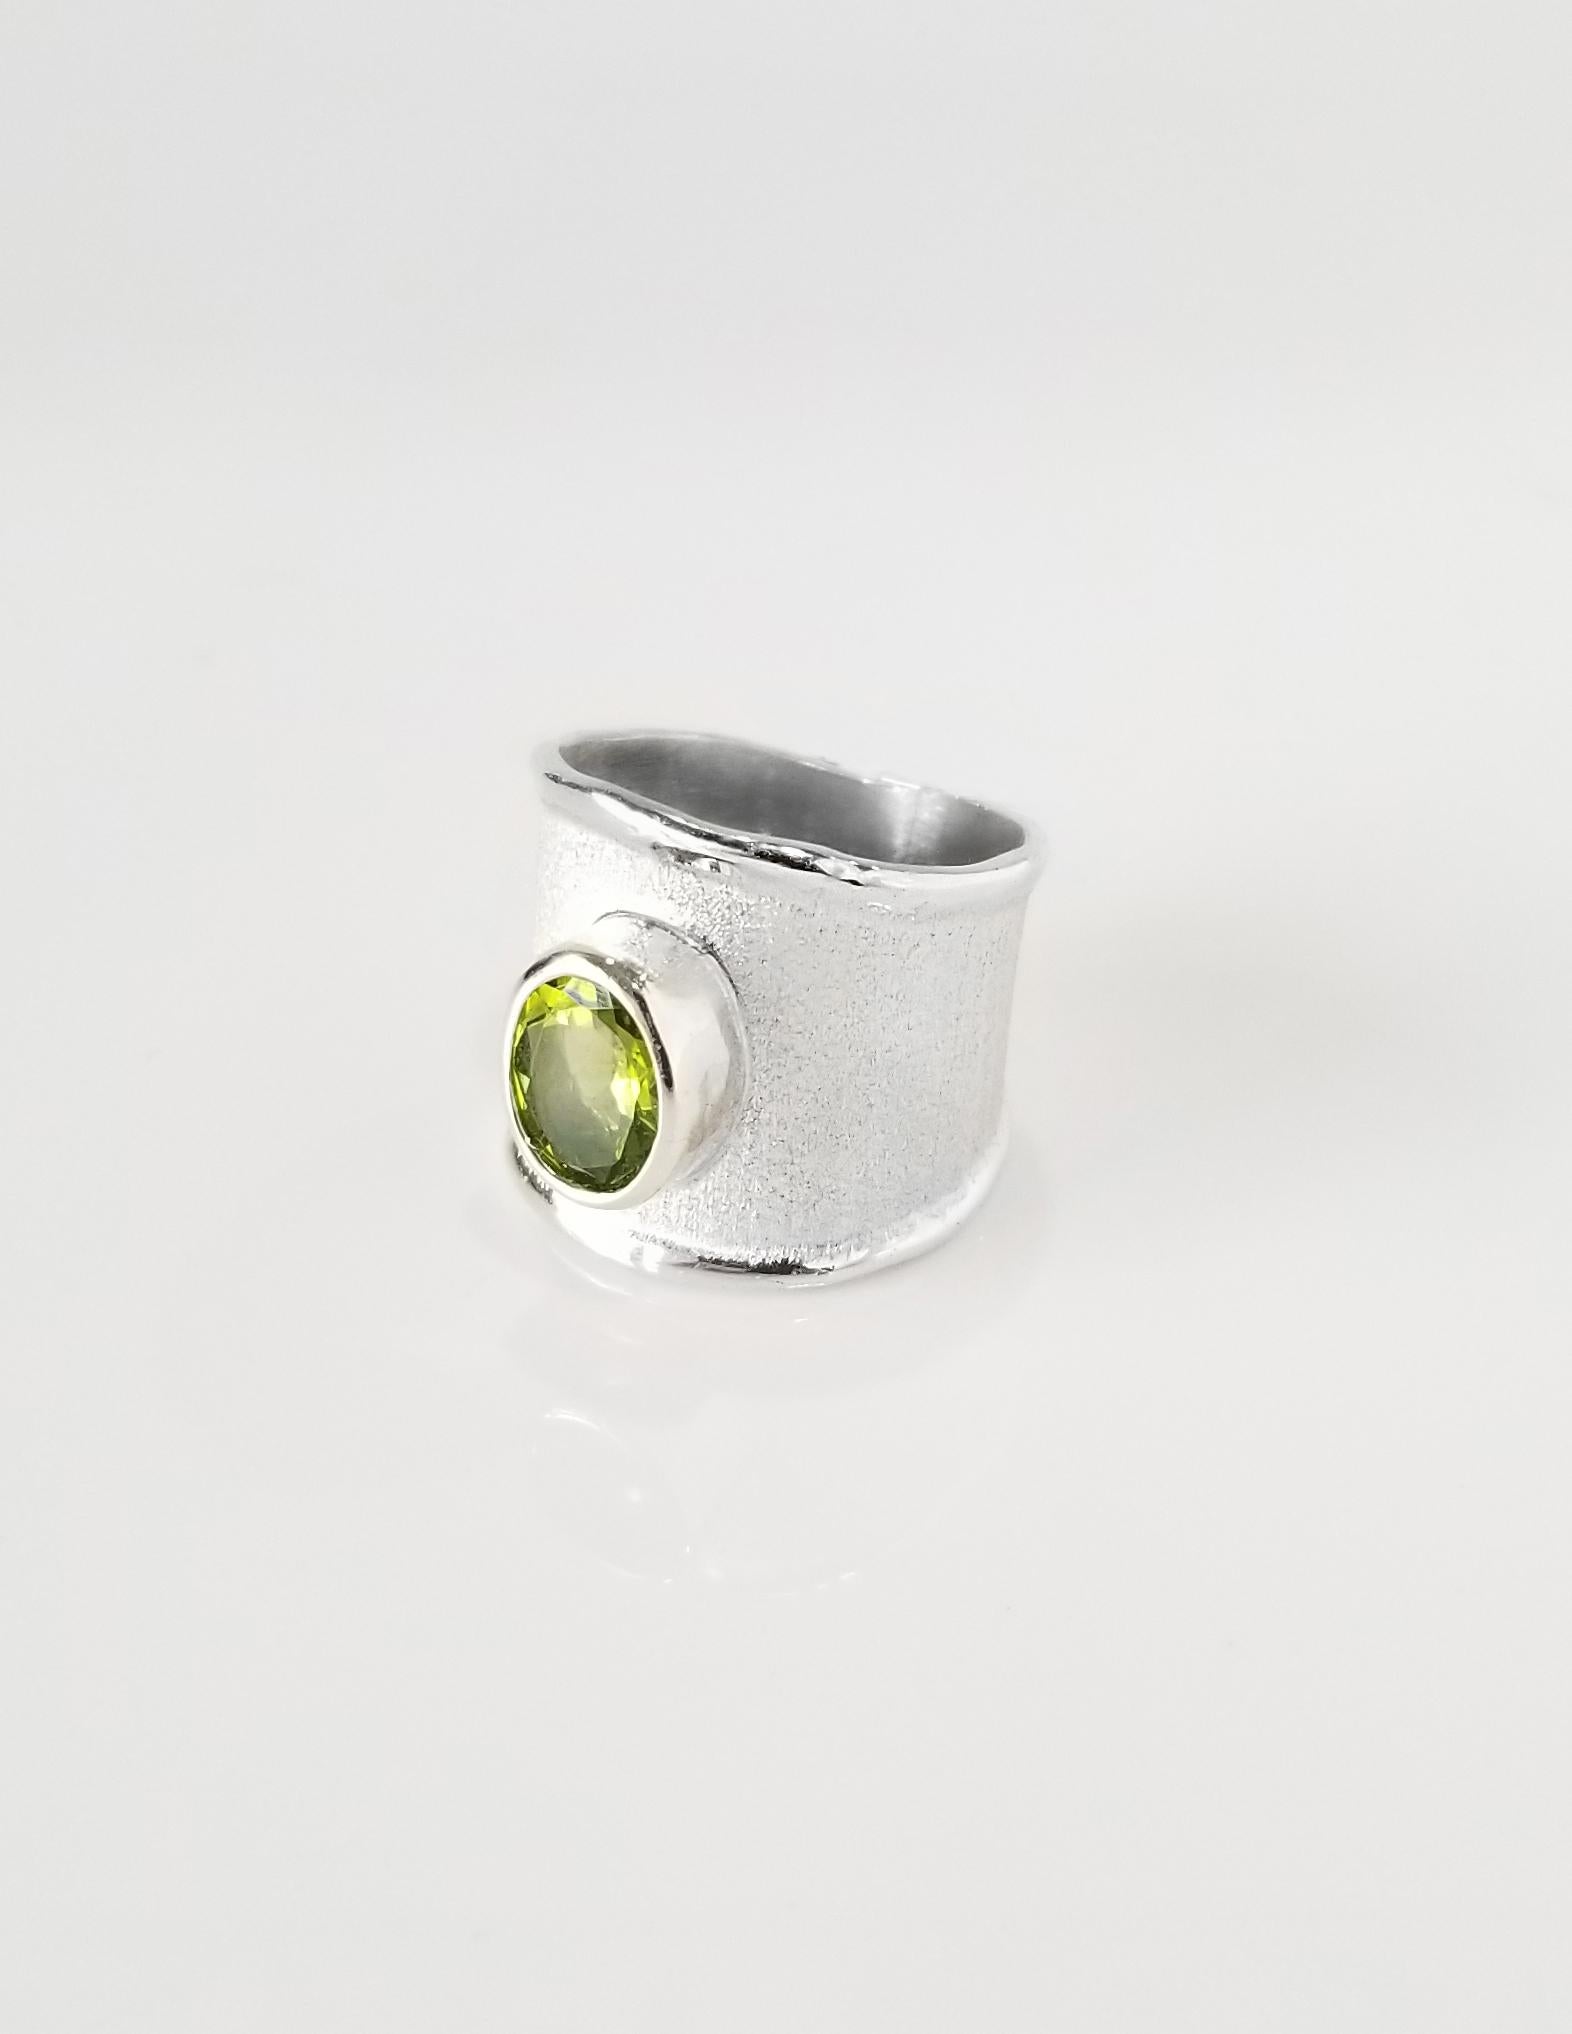 Yianni Creations Ammos Collection 100% Handmade Artisan Ring from Fine Silver featuring 1.35 Carat Peridot complemented by unique techniques of craftsmanship - brushed texture and nature-inspired liquid edges. The core of this beautiful